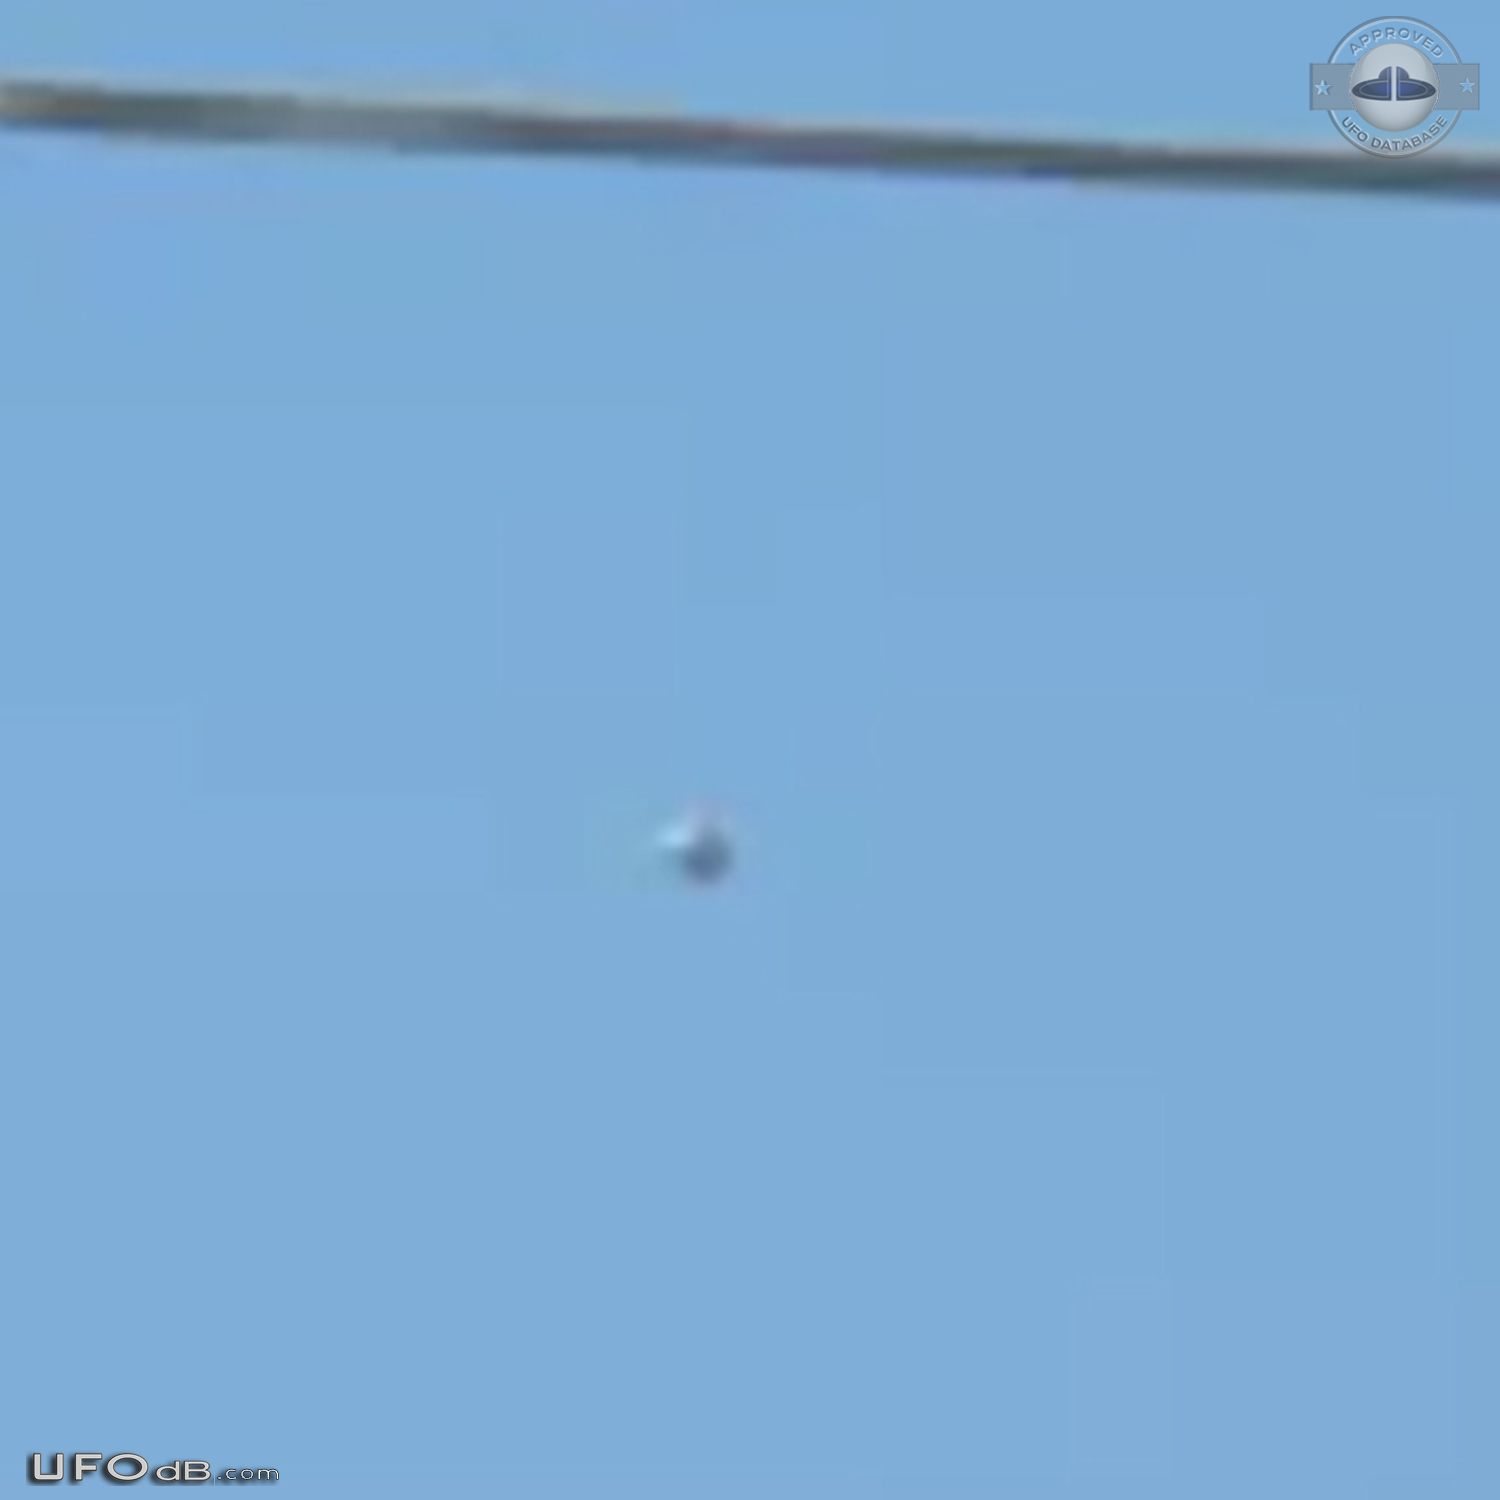 Jerky and strange UFO seen in Scarborough, Ontario canada 2015 UFO Picture #685-3